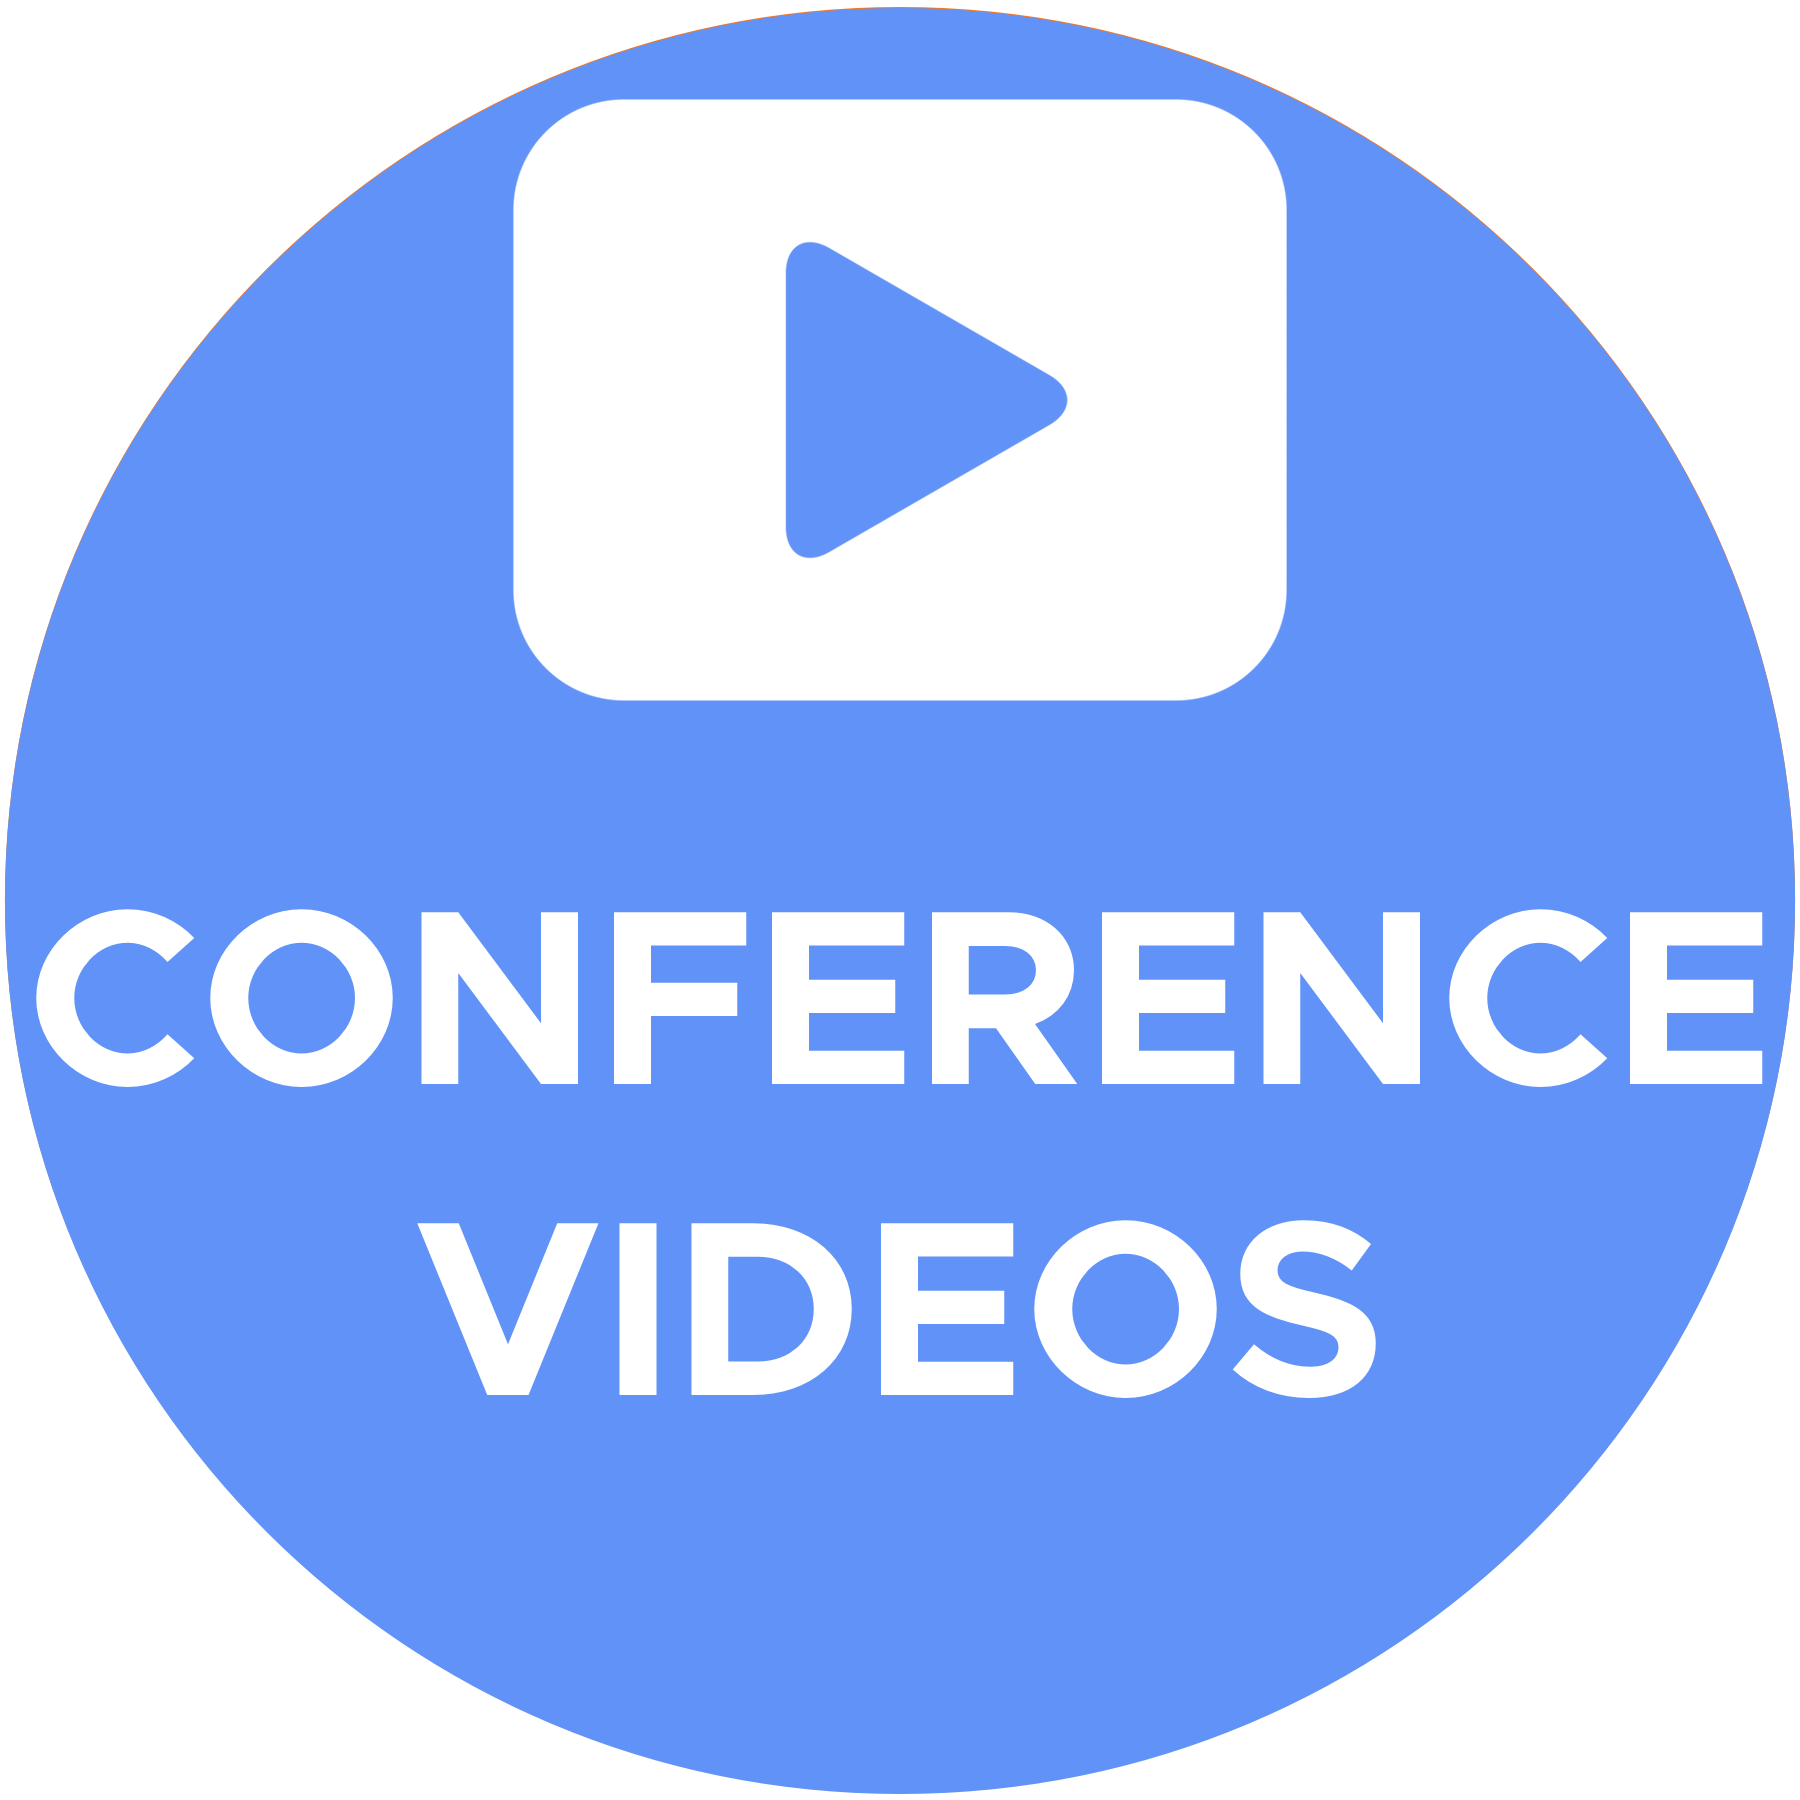 Conference Videos